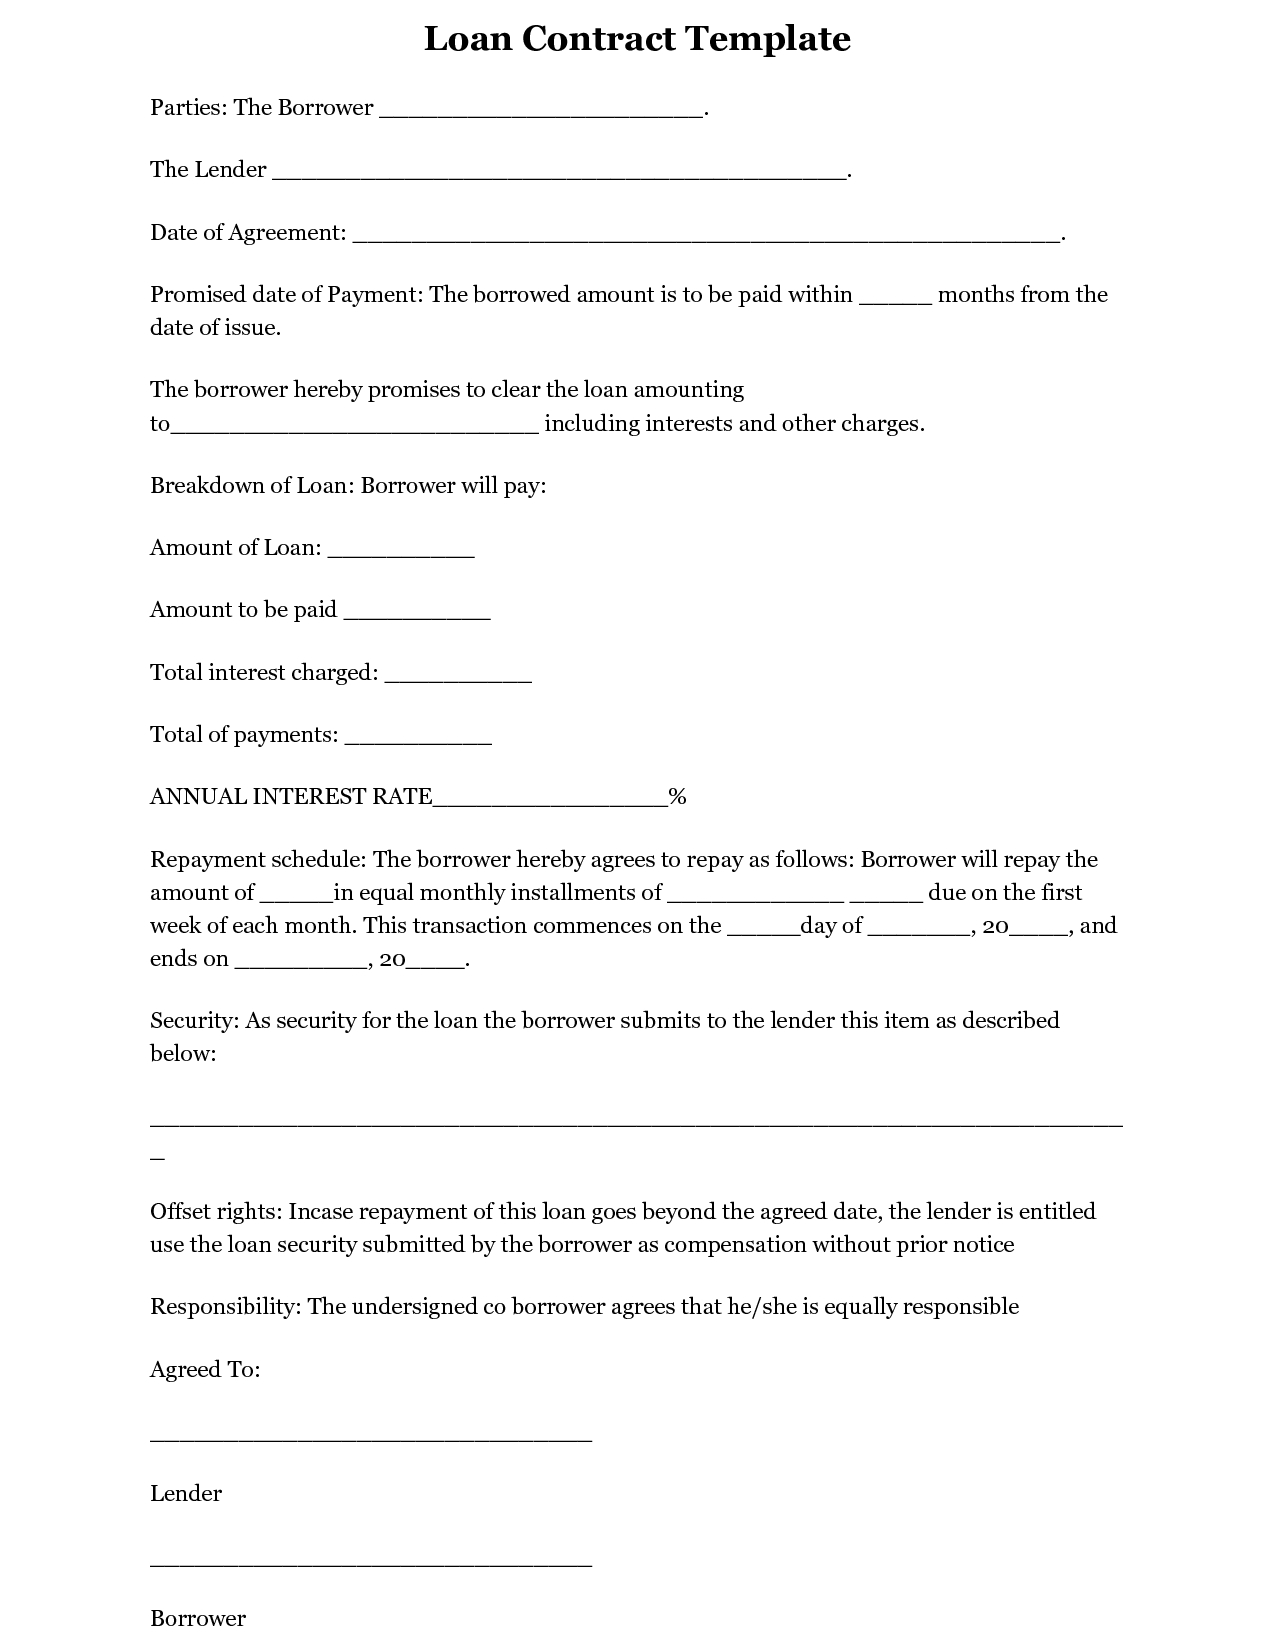 Terrific Blank Loan Contract Or Agreement Template Sample Inside Blank Loan Agreement Template